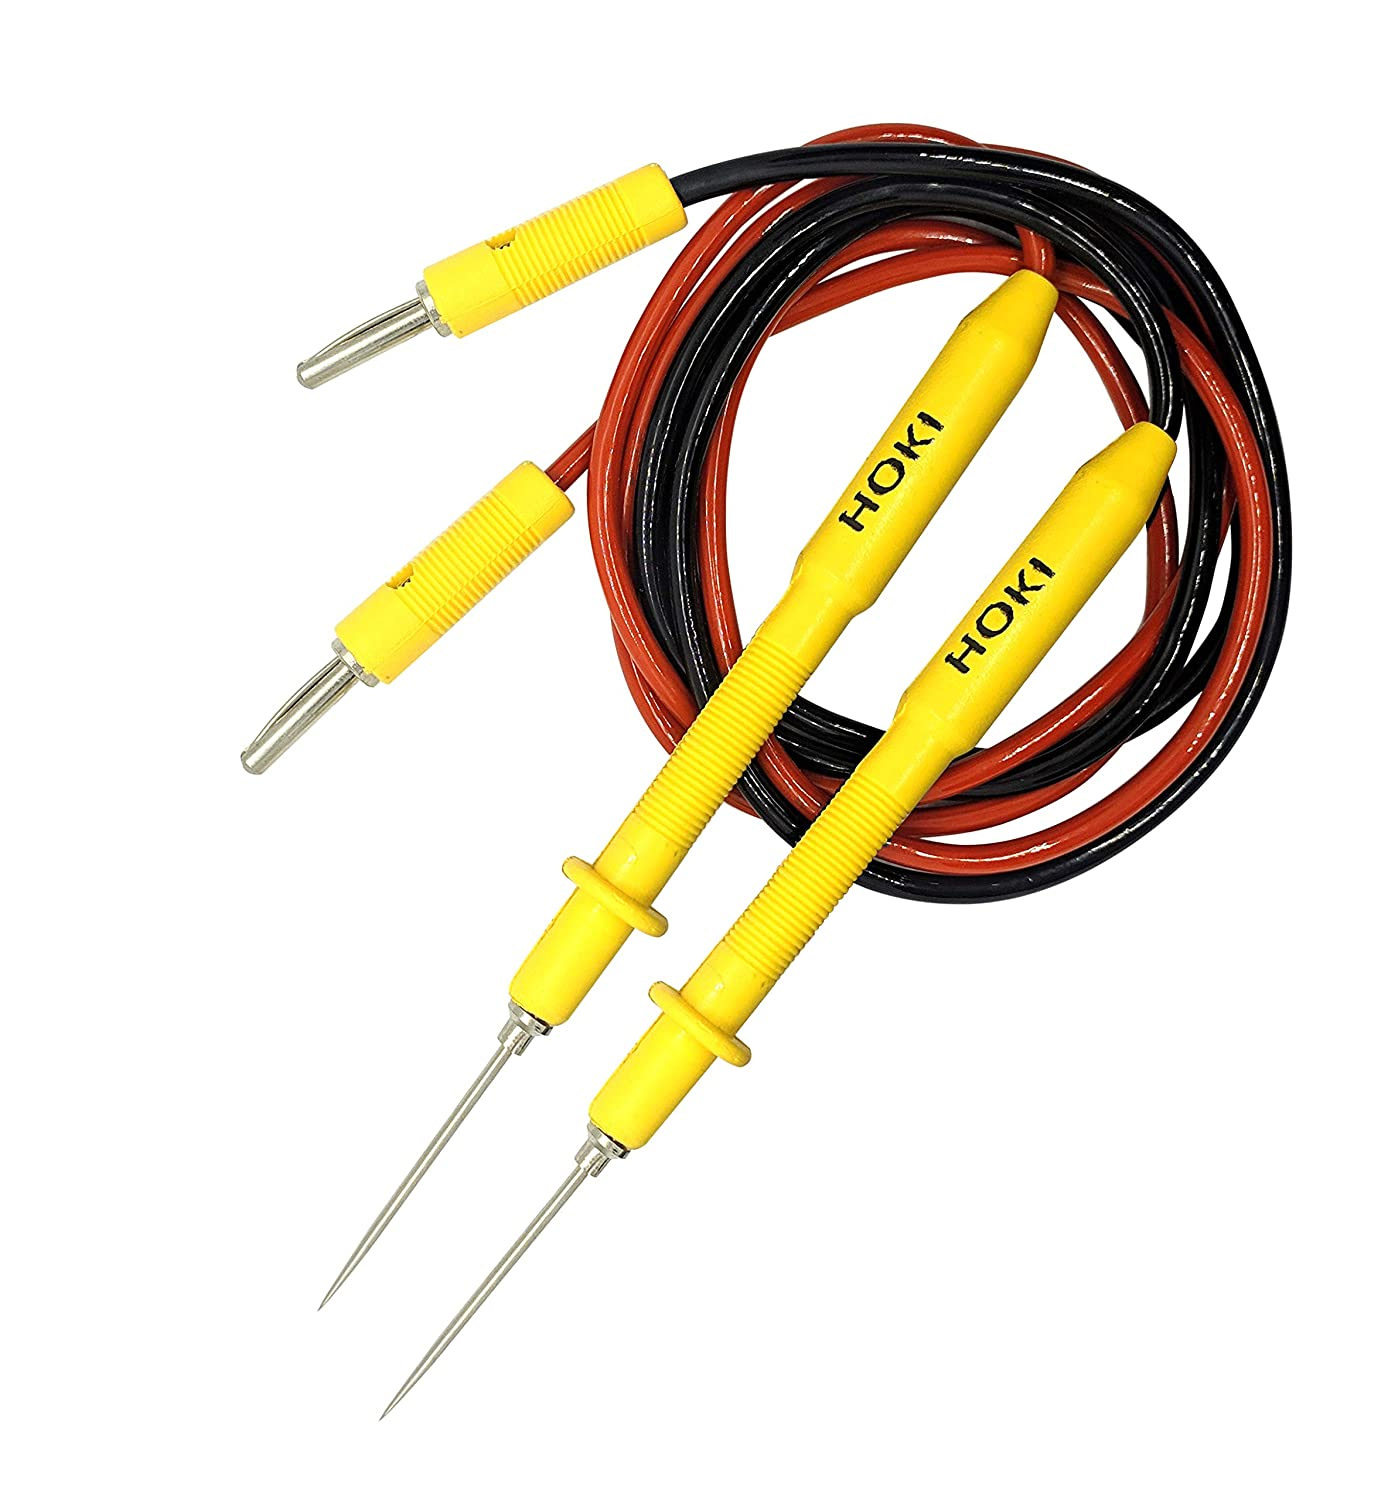 Ekavir Test Lead Cable for Digital Multimeter Long Pin Silicone Probs Universal (Long Needle)